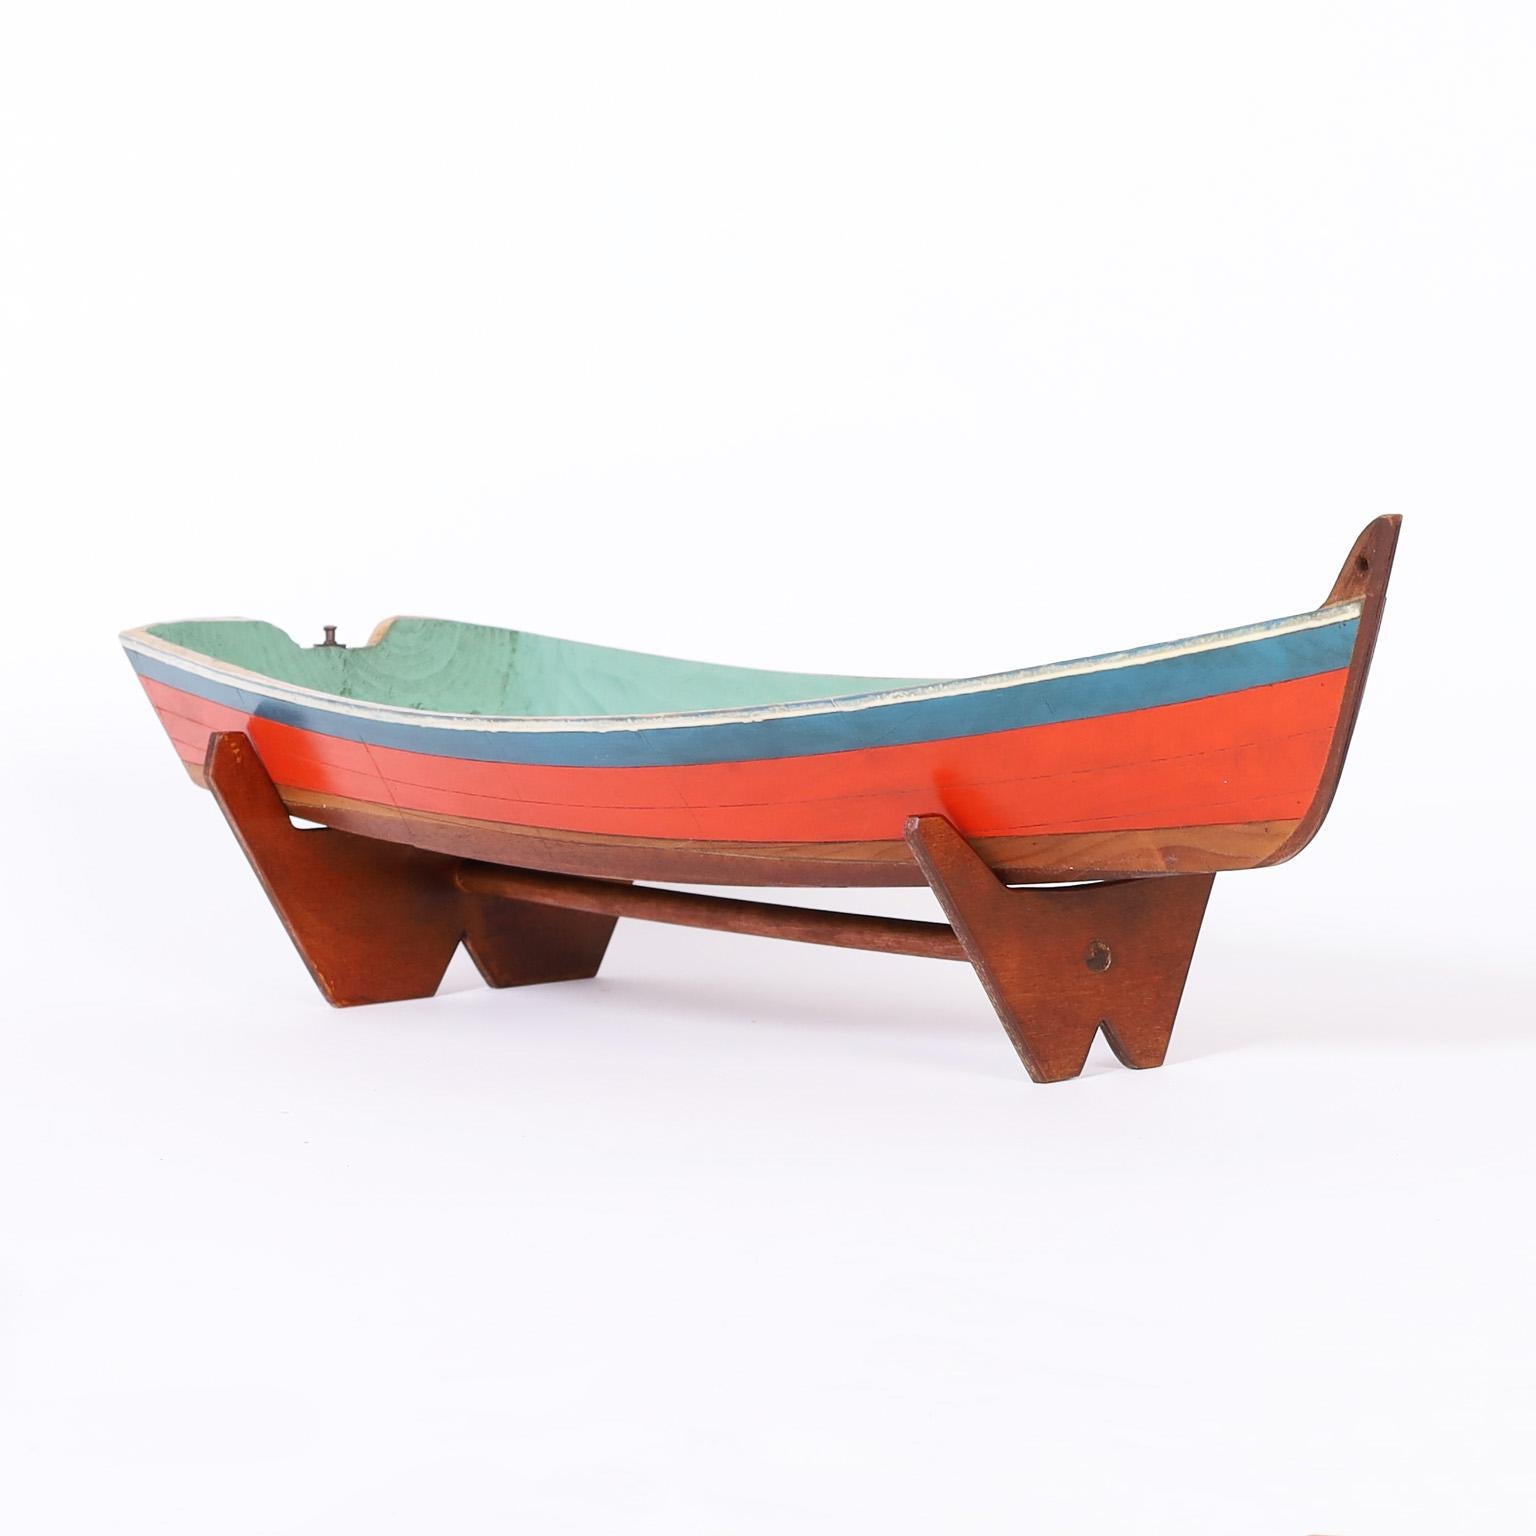 Pair of similar flat hull motor boat models hand crafted with mahogany, retaining their original paint and presented on custom wood stands. Priced individually. 

Measures: Front Model- H: 6 W: 21.5 D: 7.5 $1,500
Back Model- H: 7 W: 27.5 D: 7.5